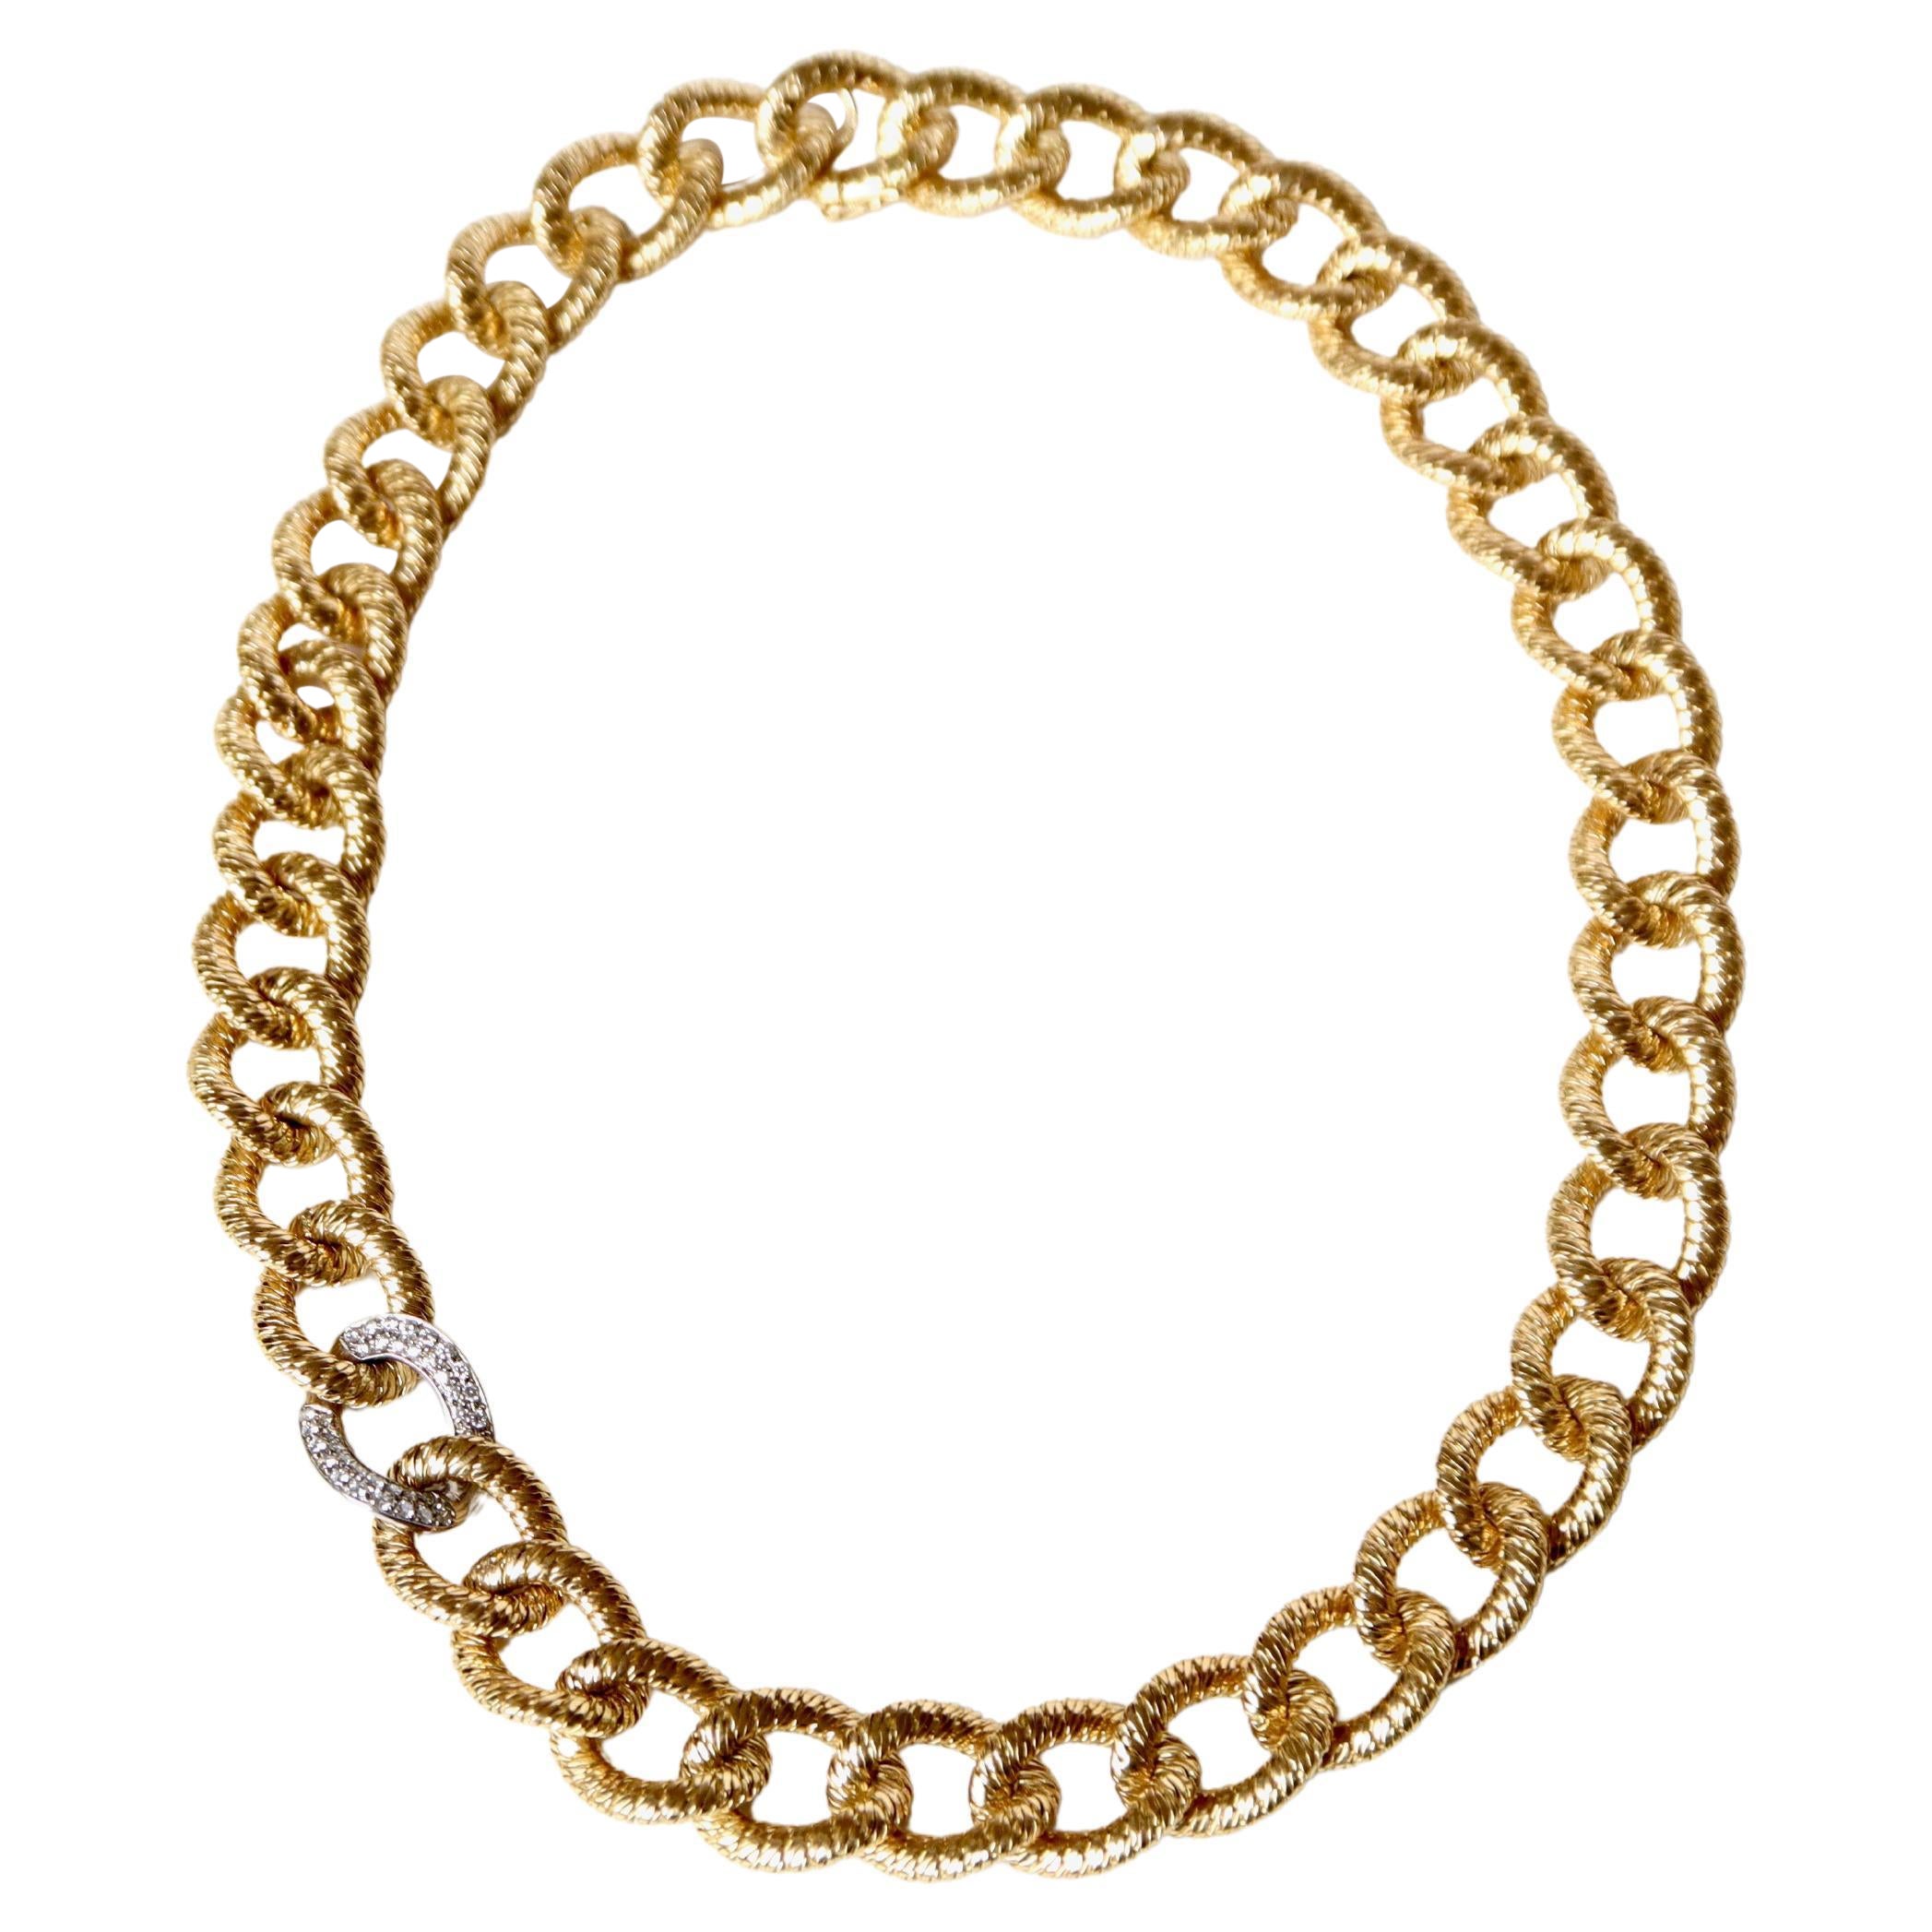 Choker Necklace in 18 Carat Yellow Gold and Diamonds